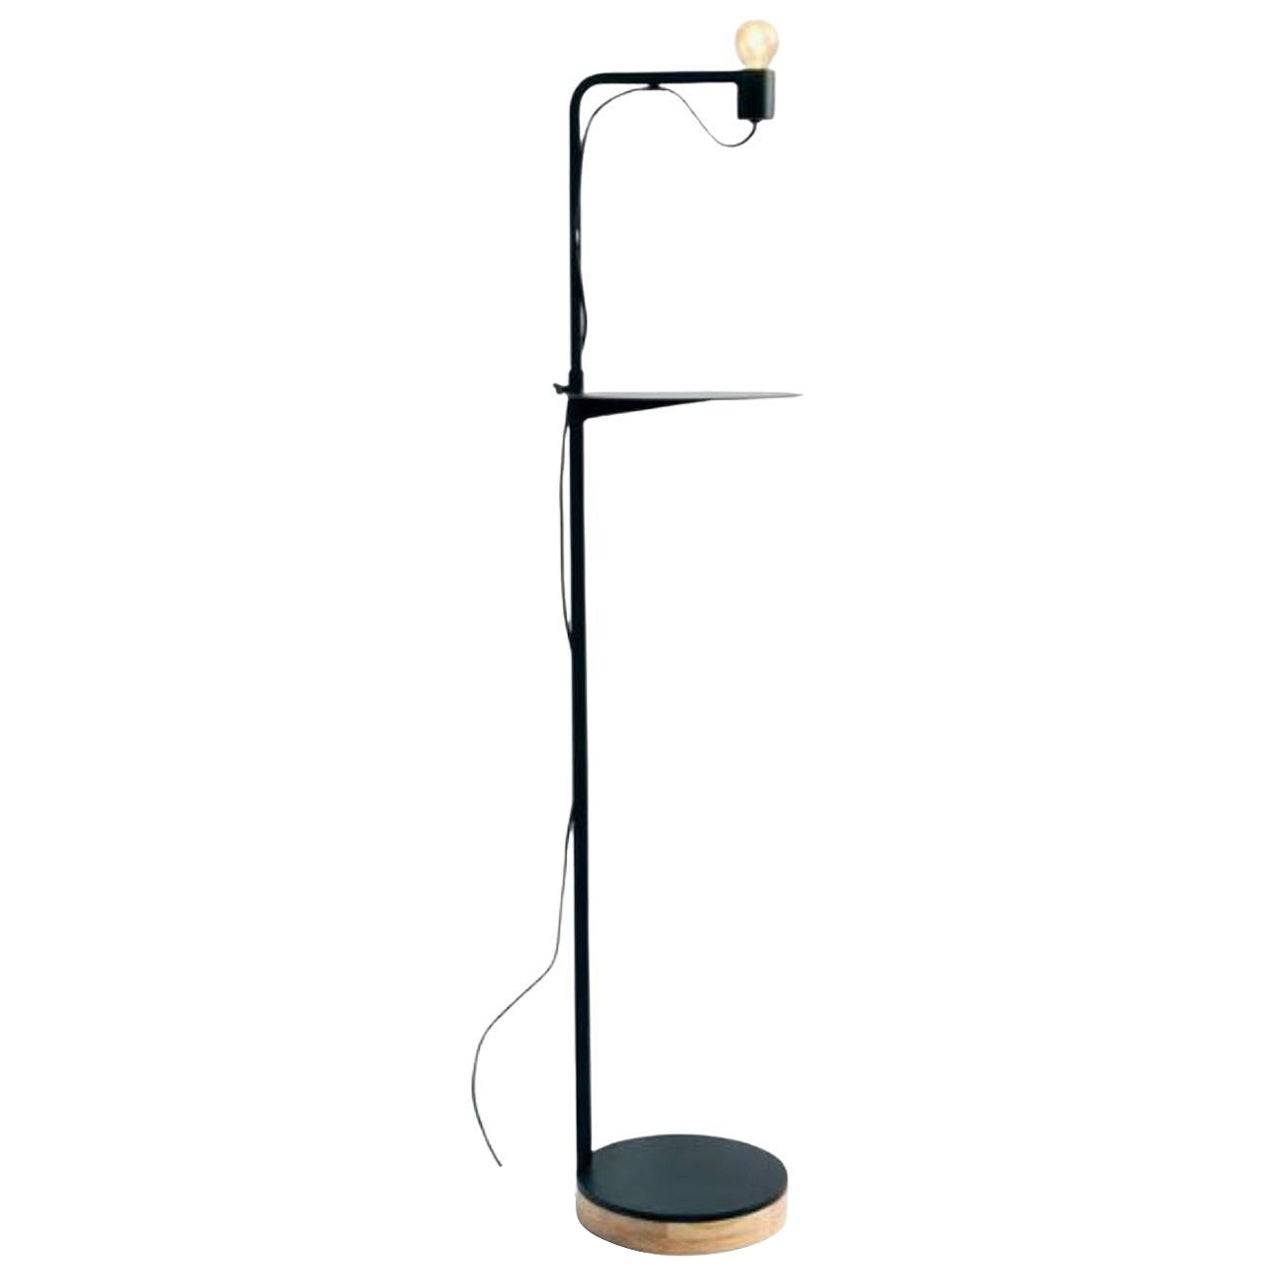 Grafit Floor Lamp with Shelf by RADAR For Sale